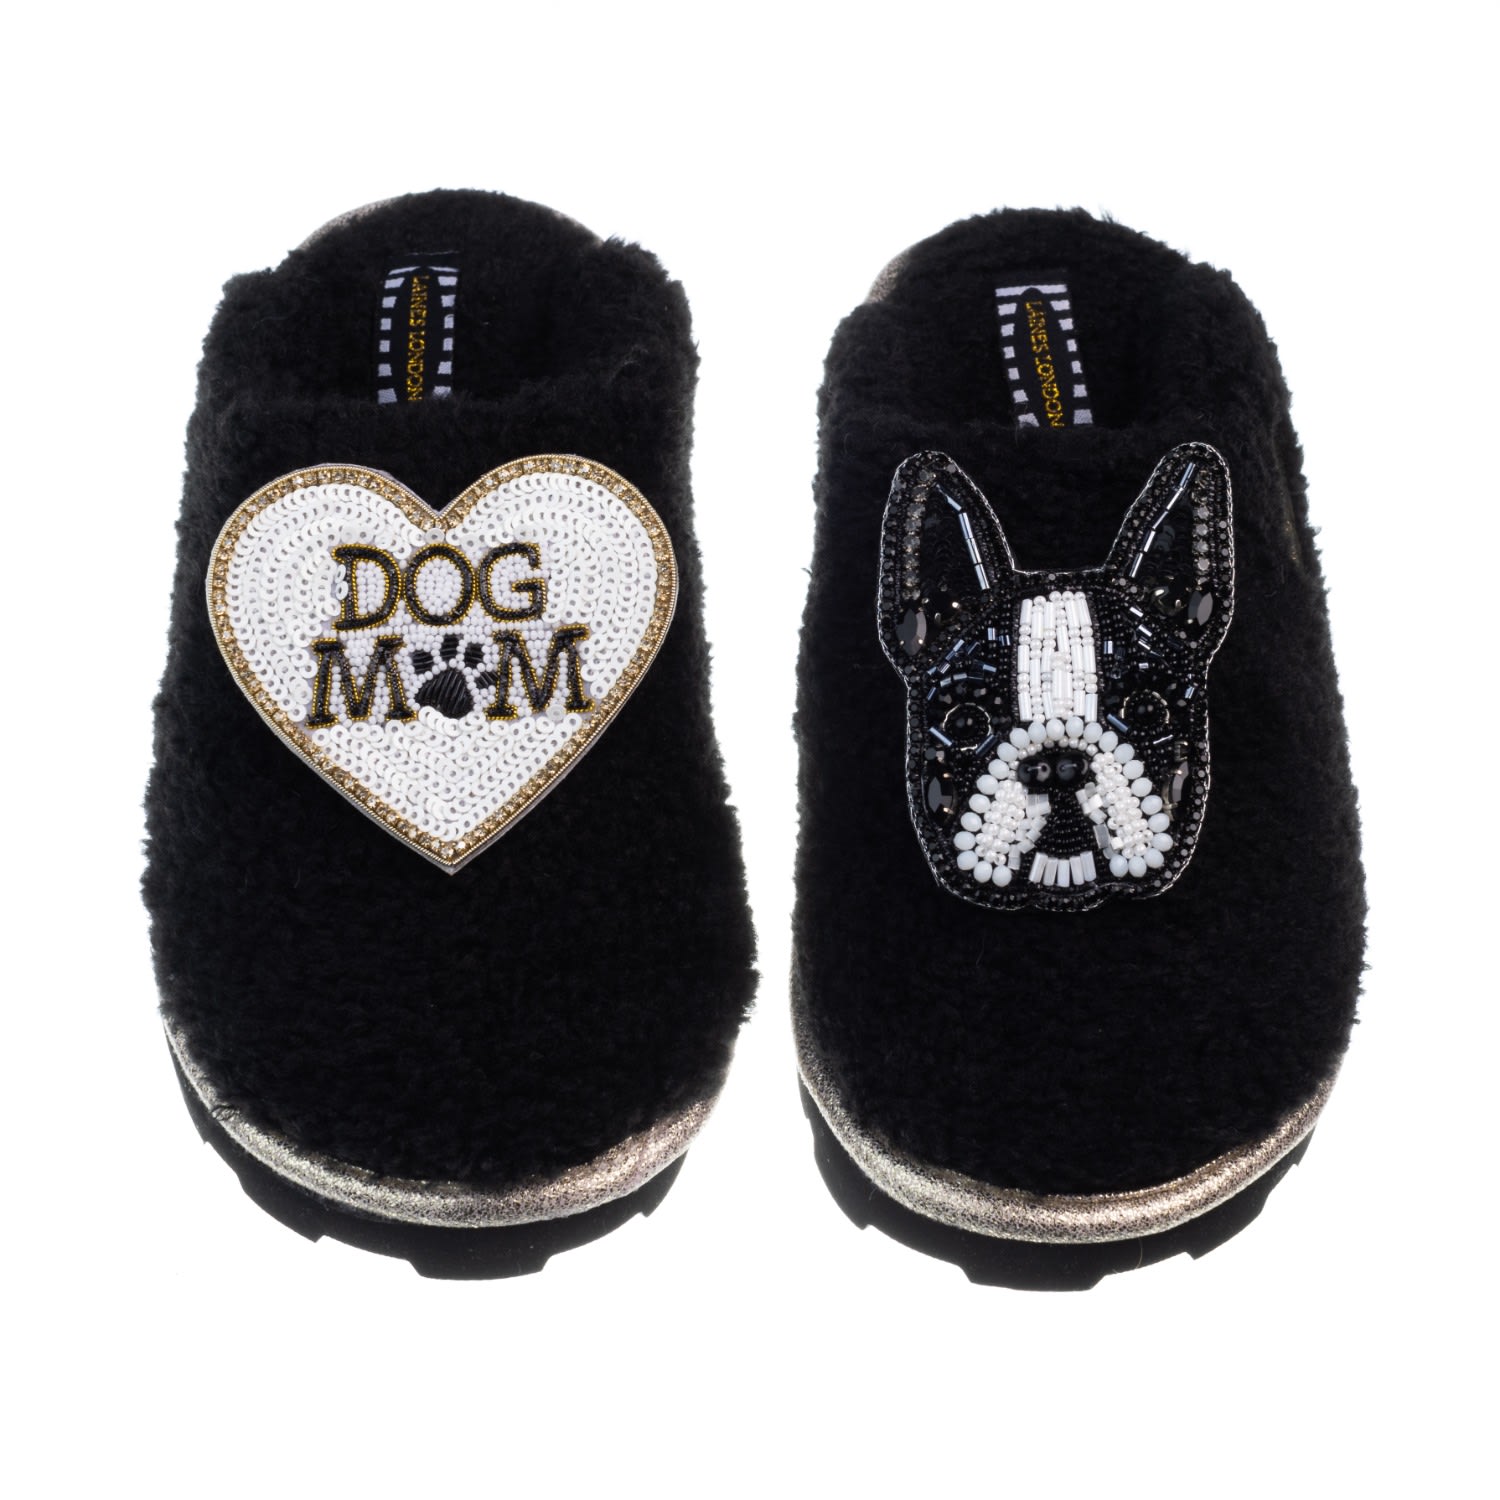 Women’s Teddy Closed Toe Slippers With Buddy The Boston Terrier & Dog Mum / Mom Brooches - Black Large Laines London